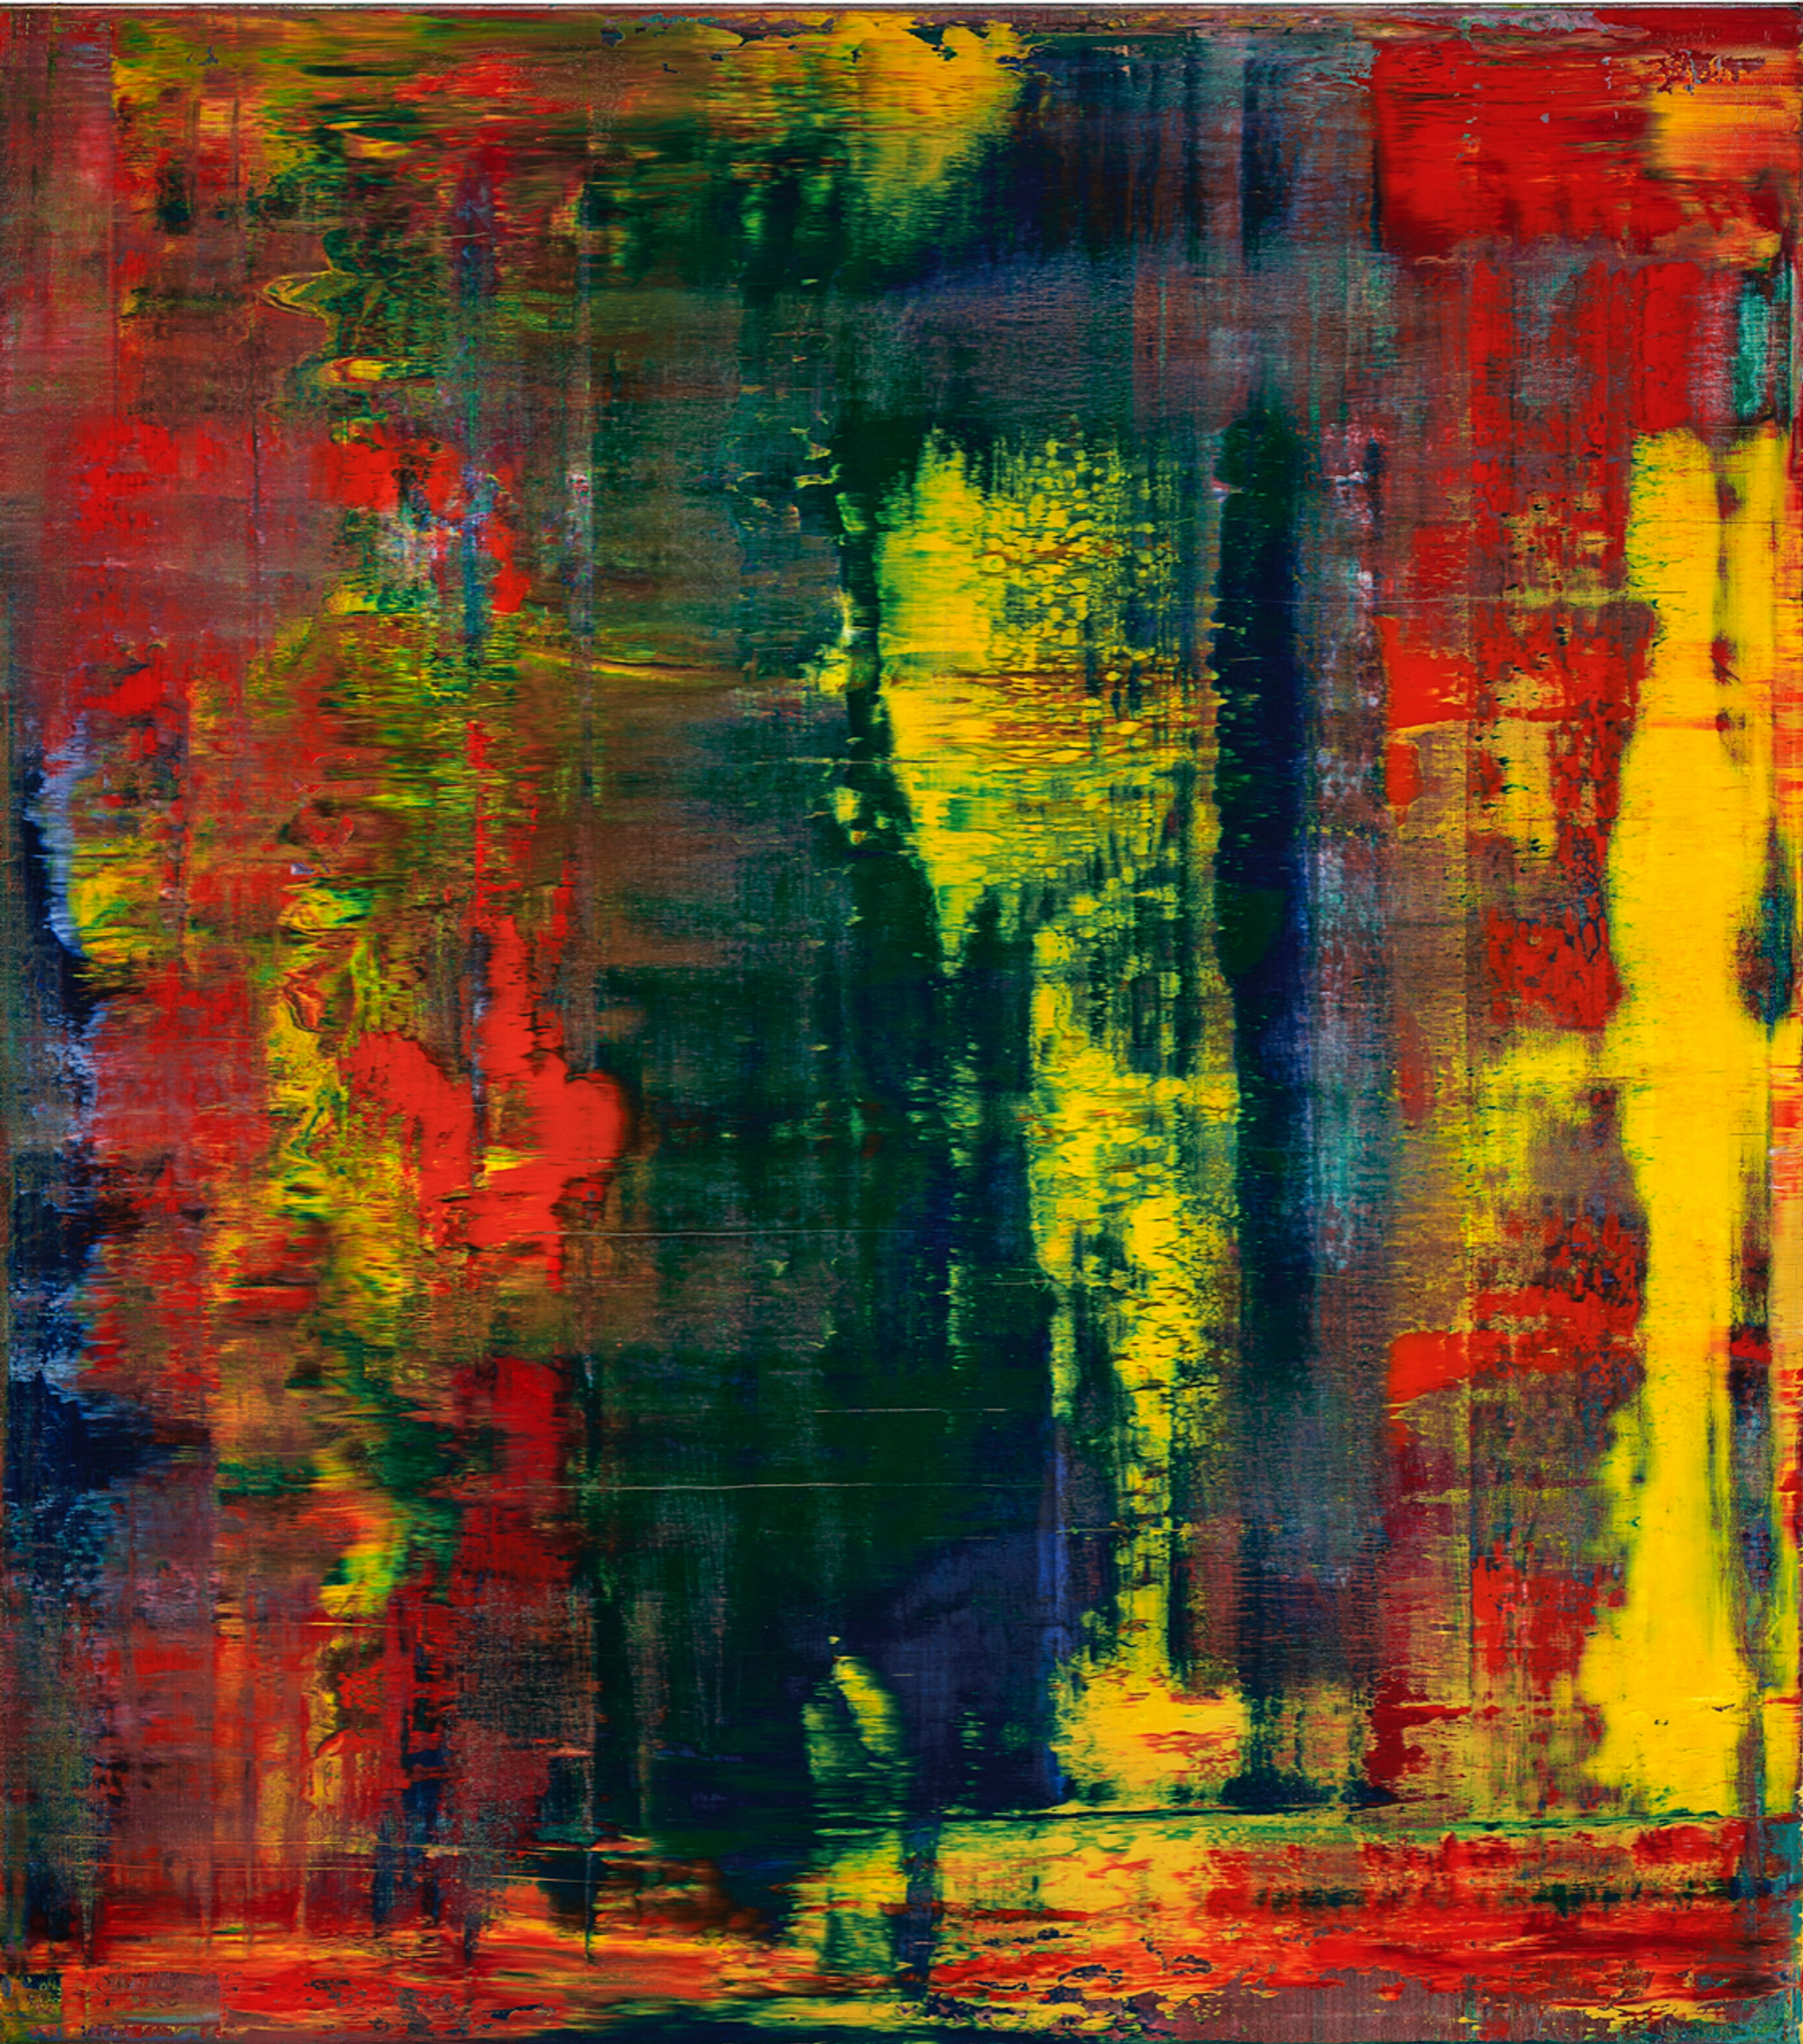 Abstract painting by Gerhard Richter, featuring smears of red, mustard yellow, navy blue, lemon yellow and mid-green.